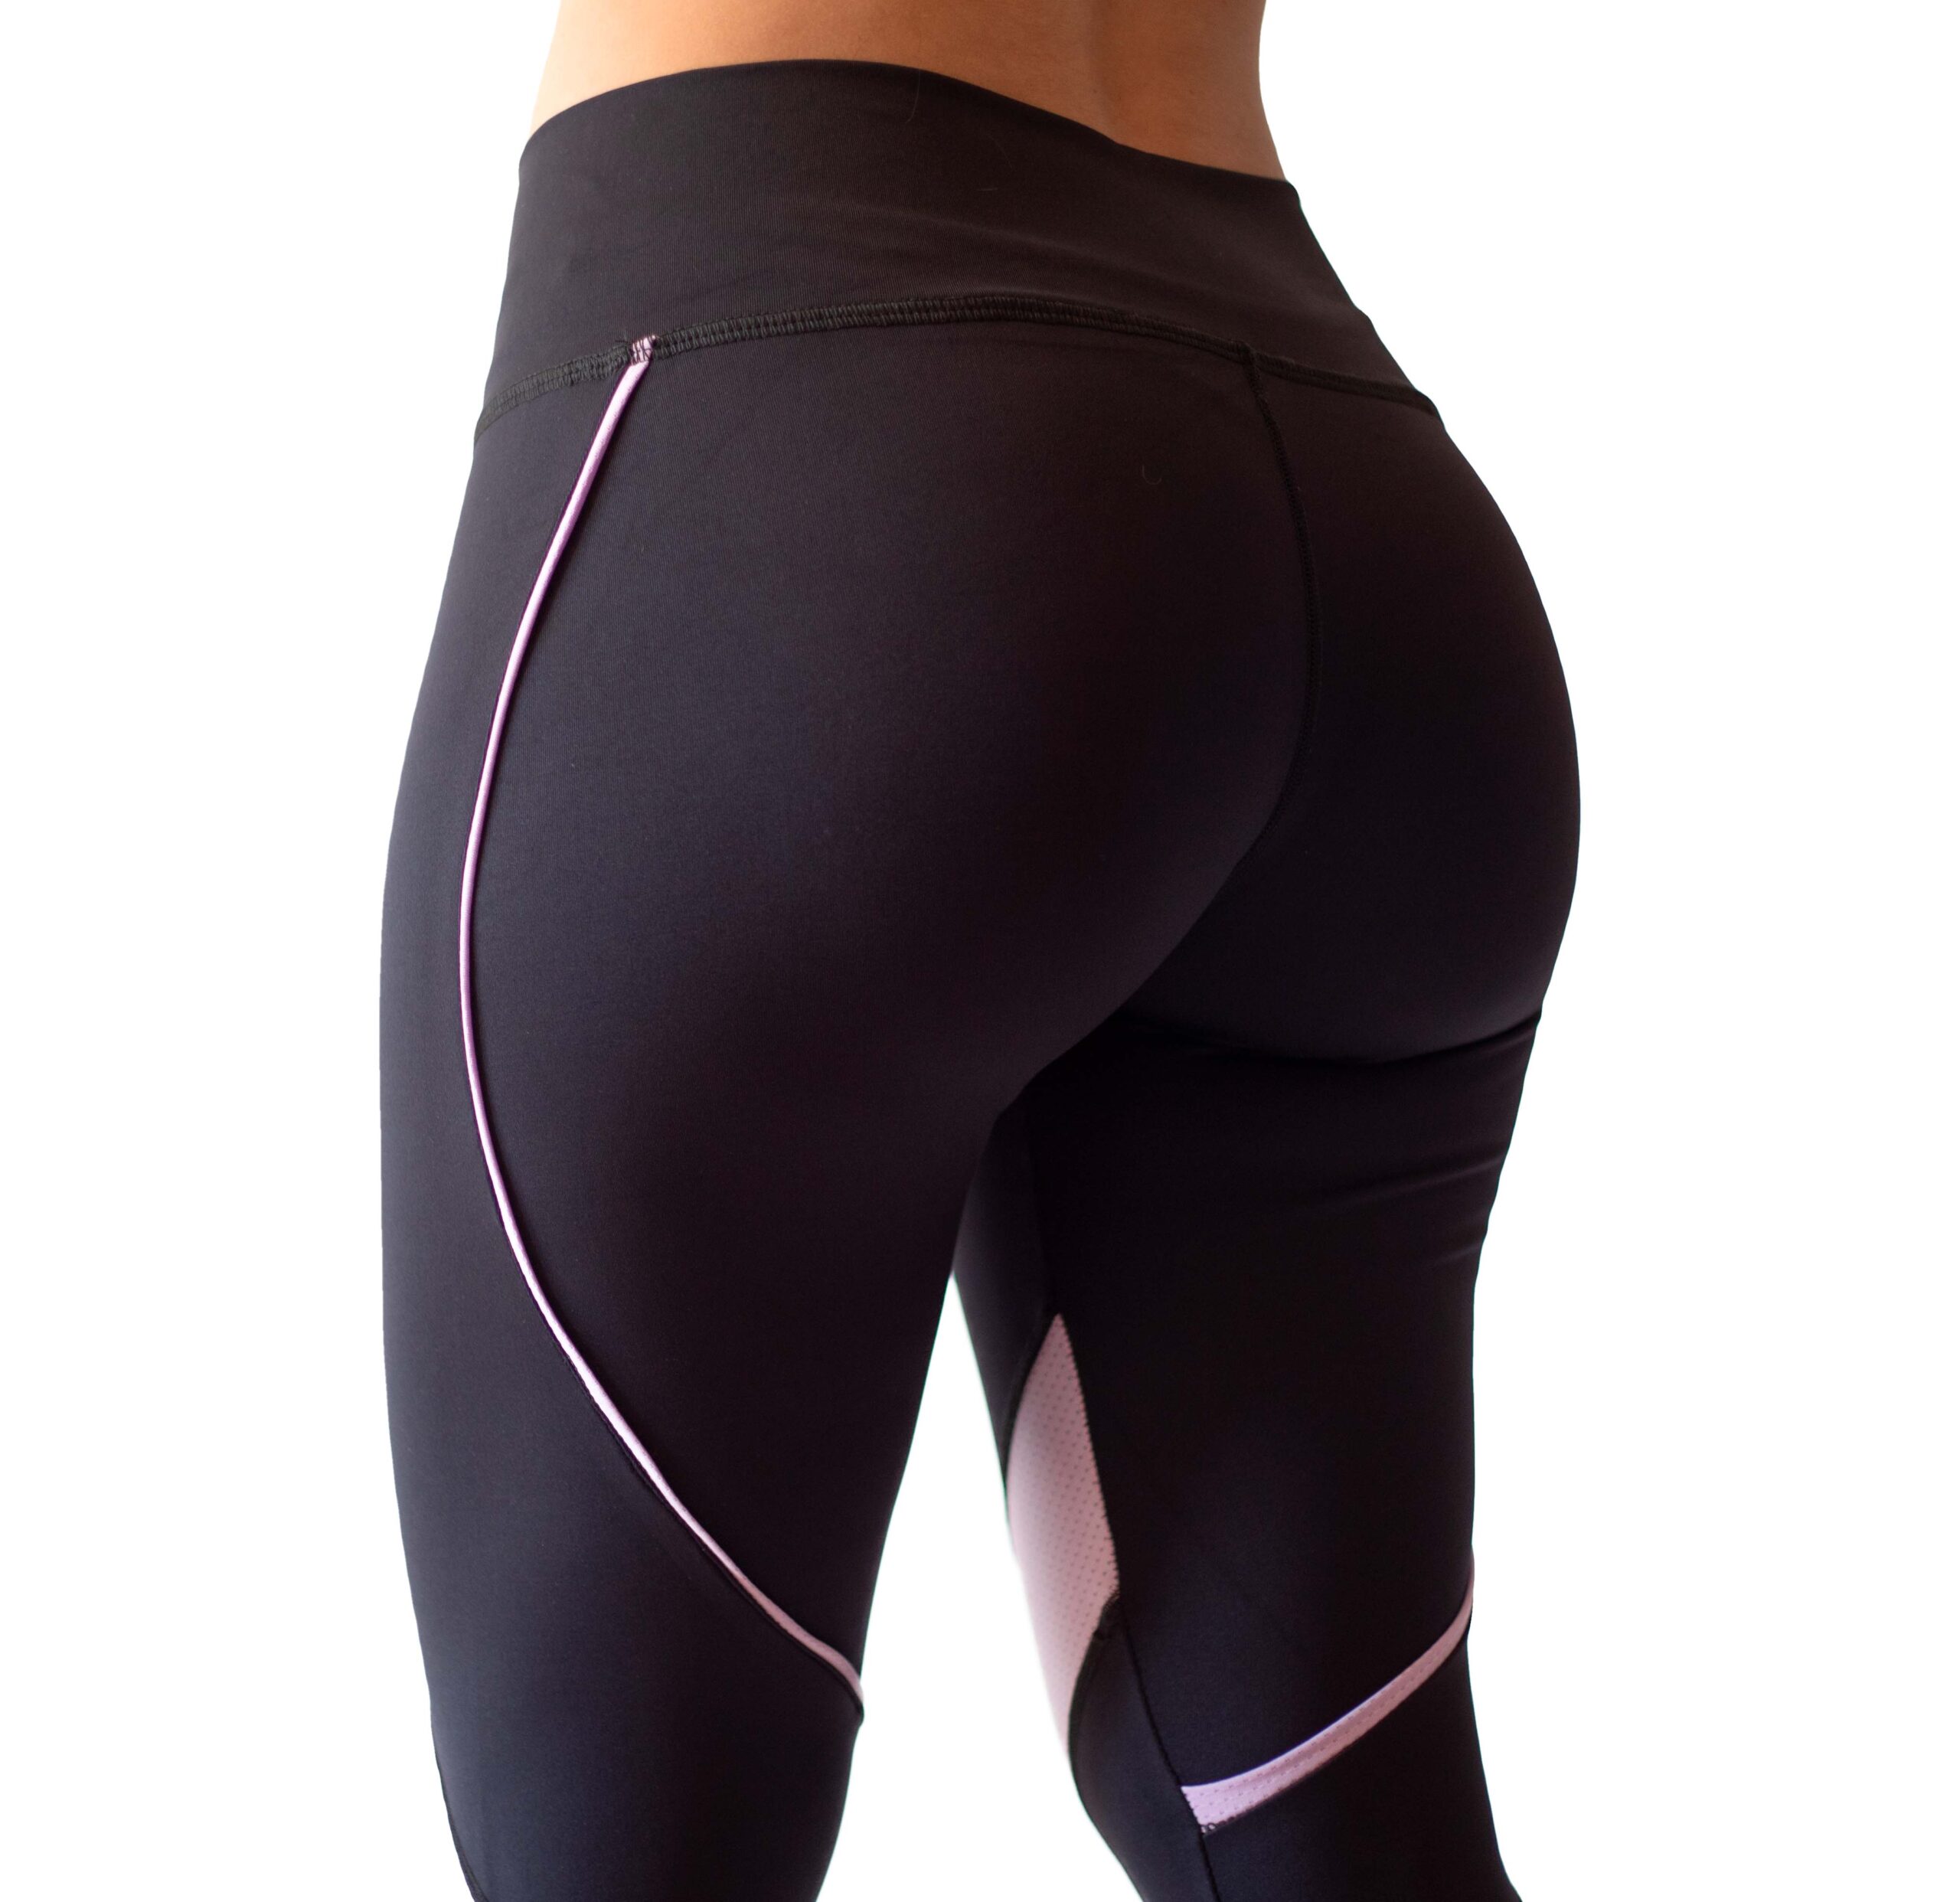 Up To 76% Off on High Waist Yoga Pants with Po